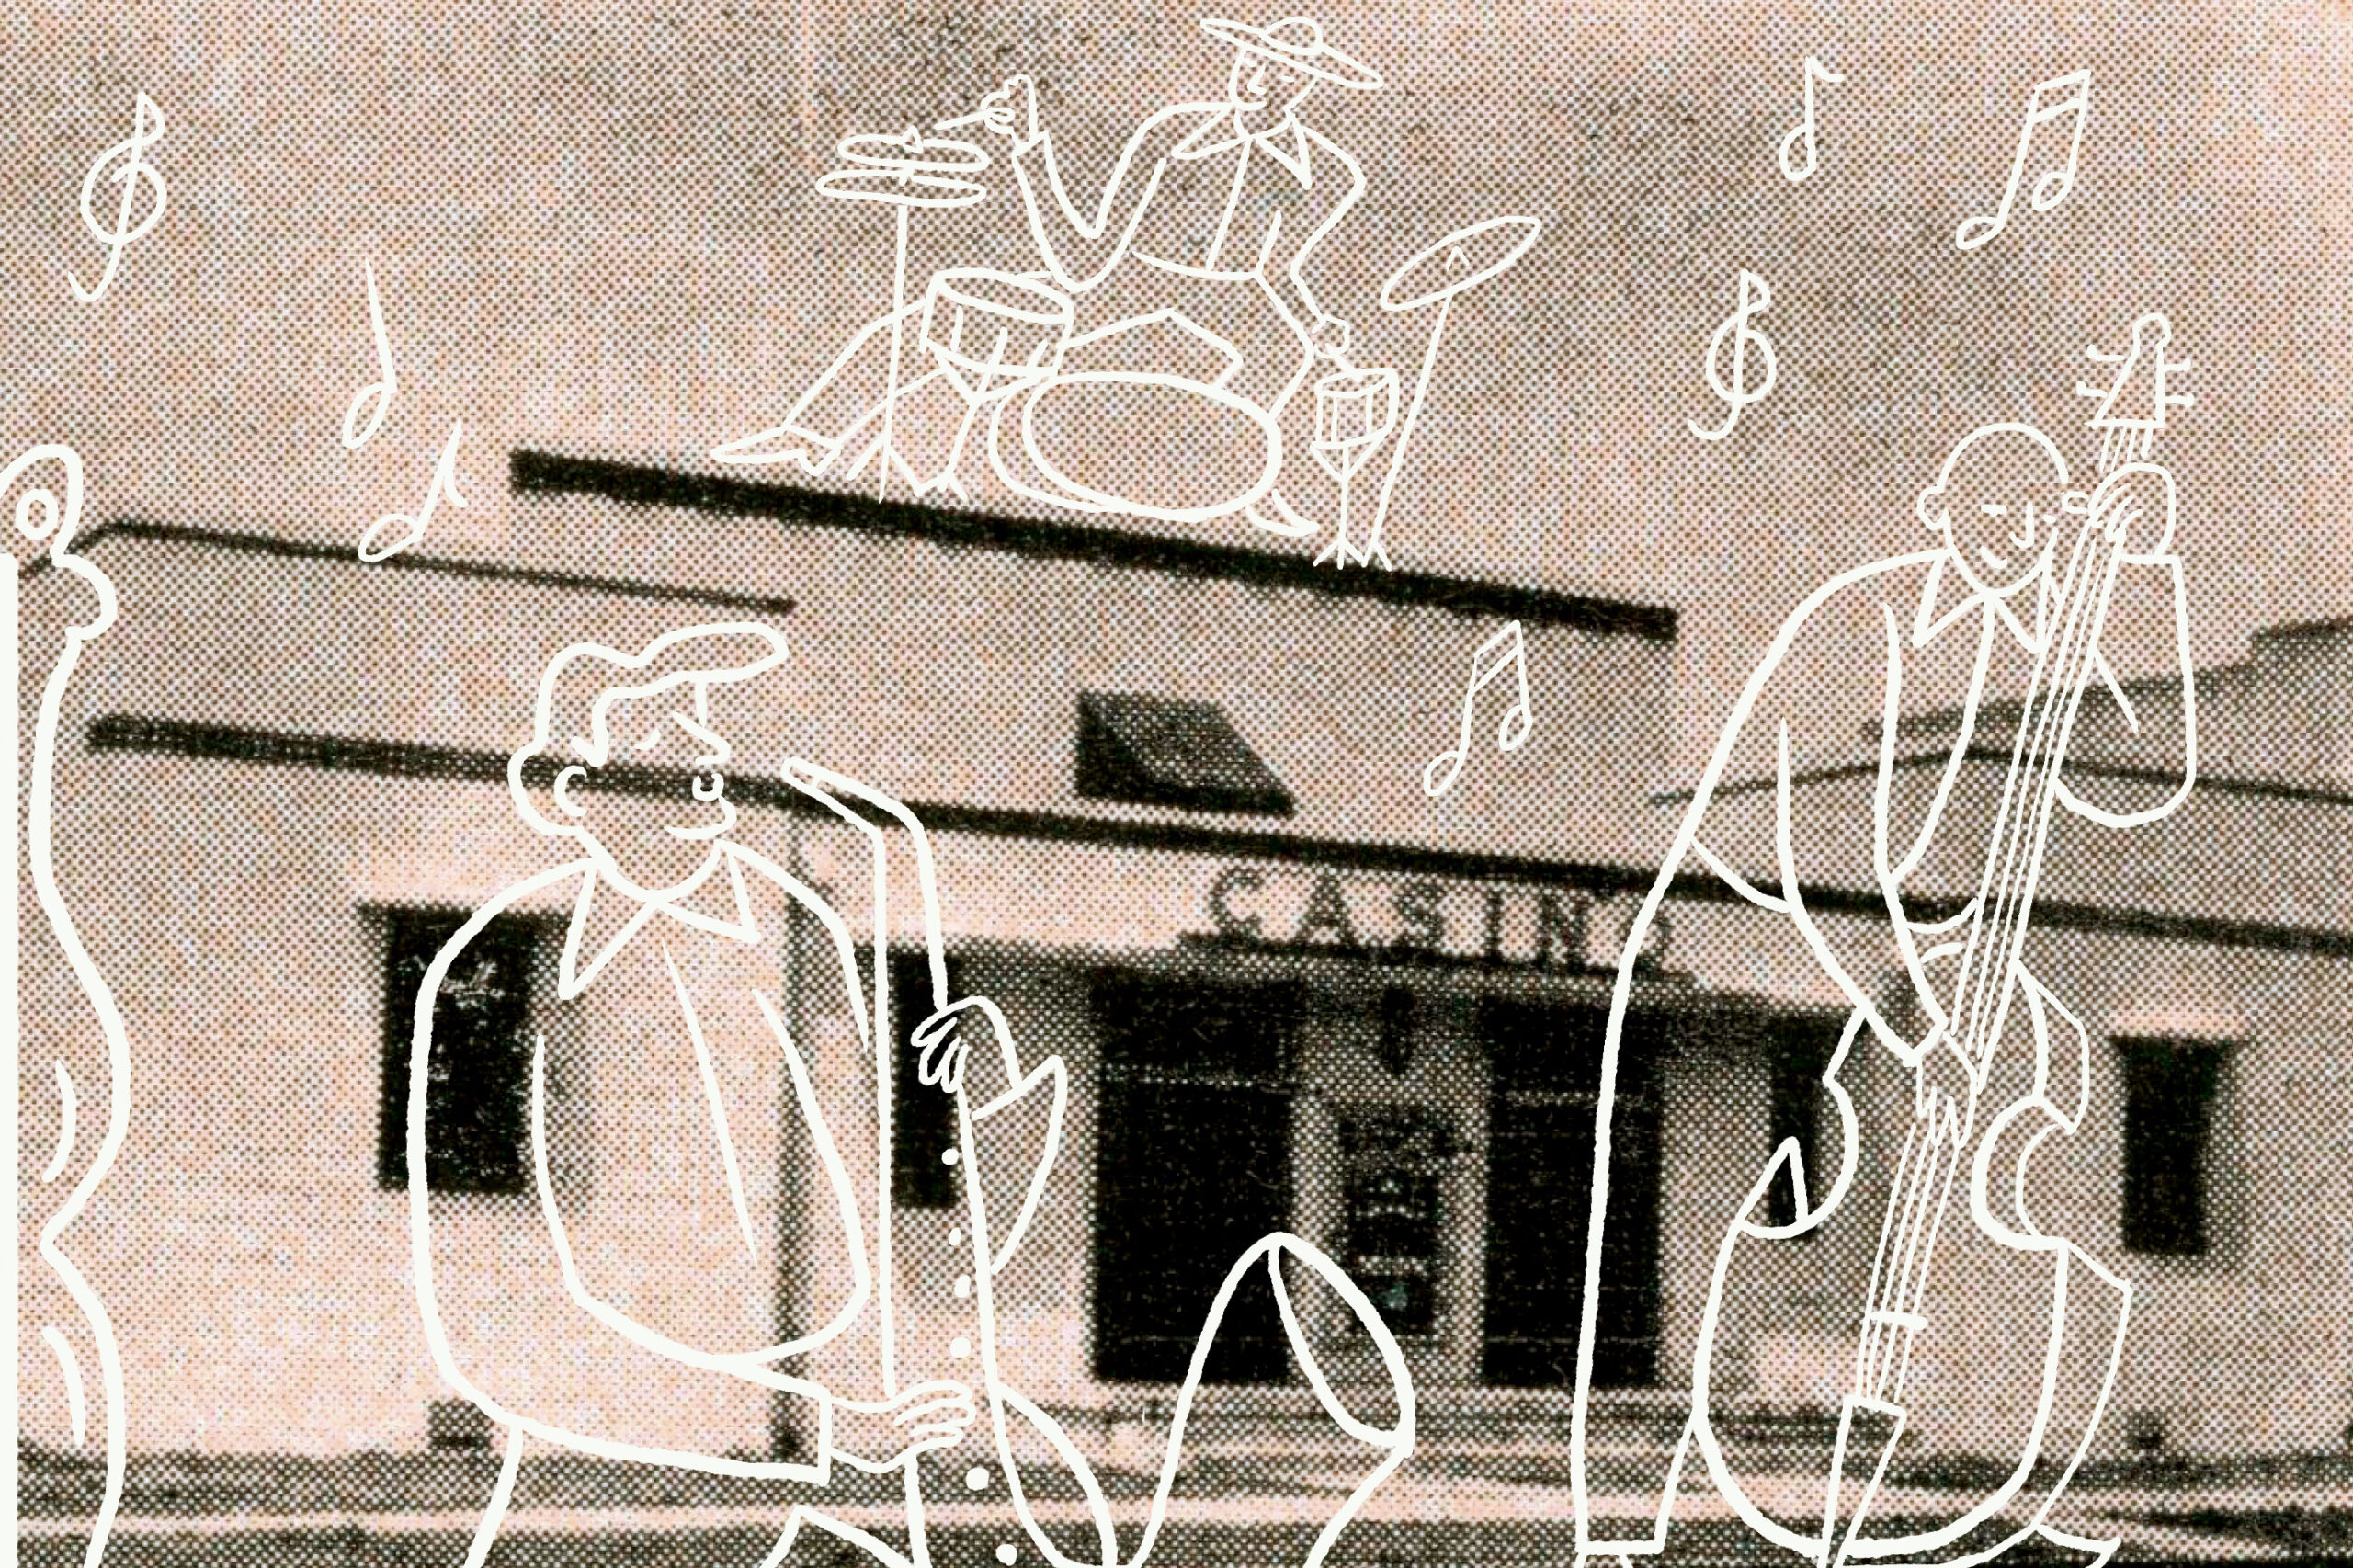 A black and white historic photo of a venue with white line illustrations of musicians (a drummer, a bassist, and a saxophone player) overlaid.